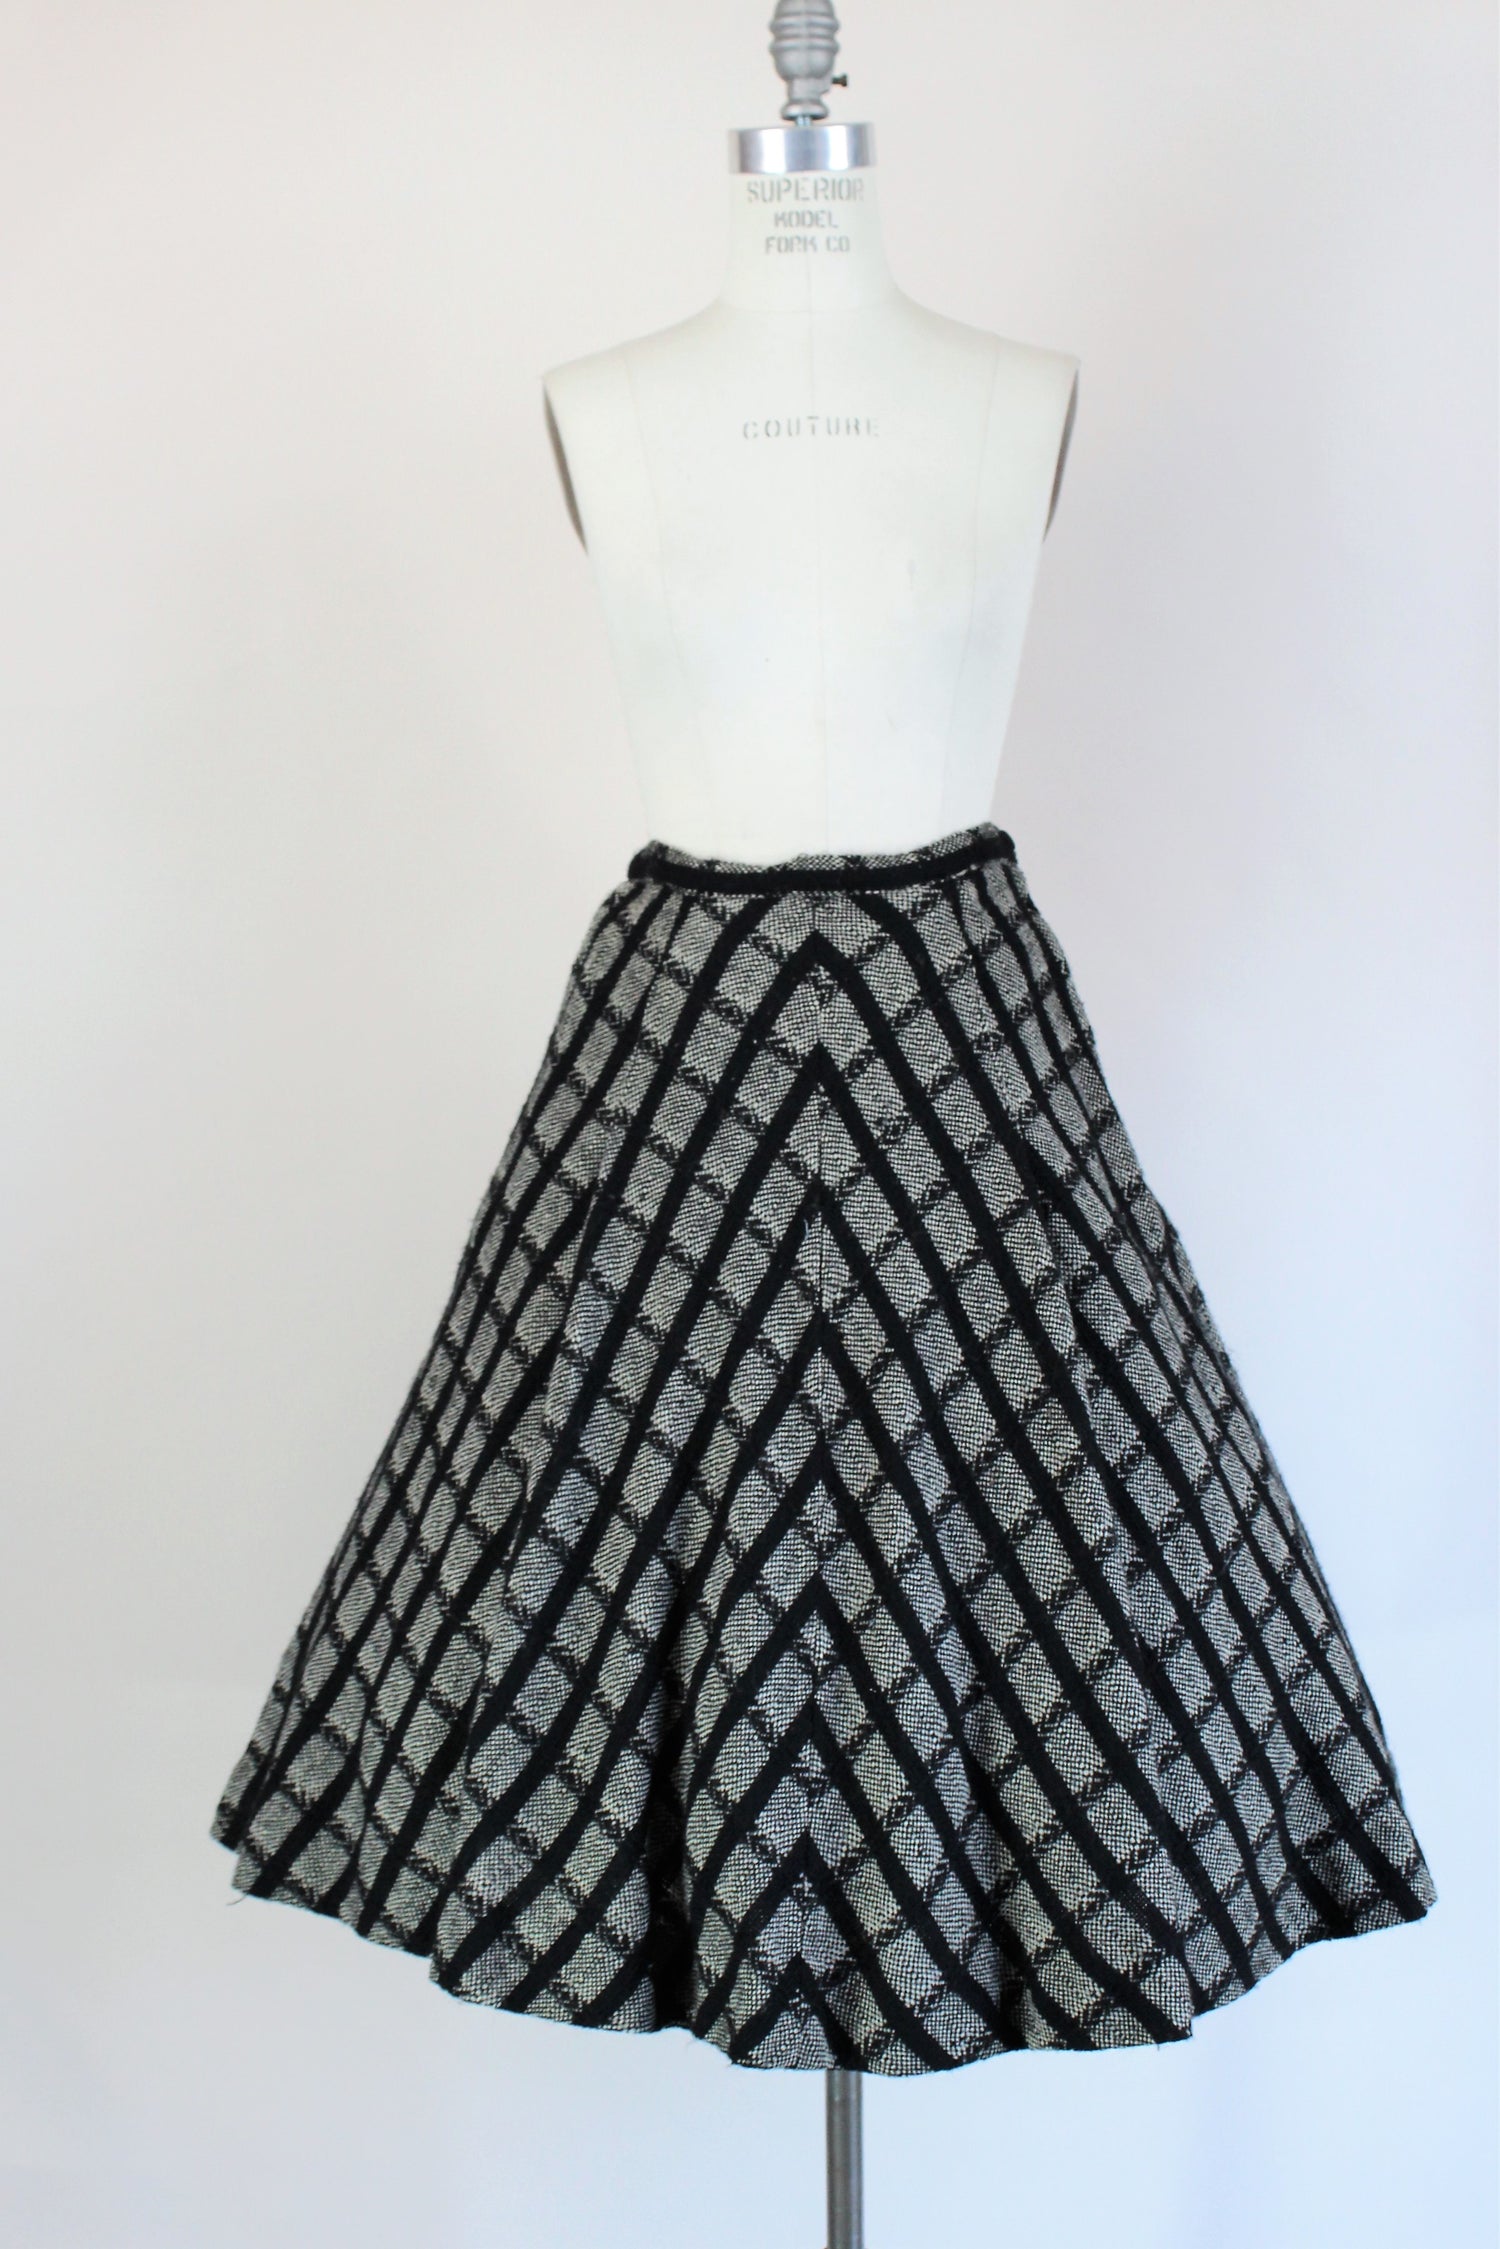 Vintage 1950s Black And White Wool Nelly De Grab Full Circle Skirt With Pocket